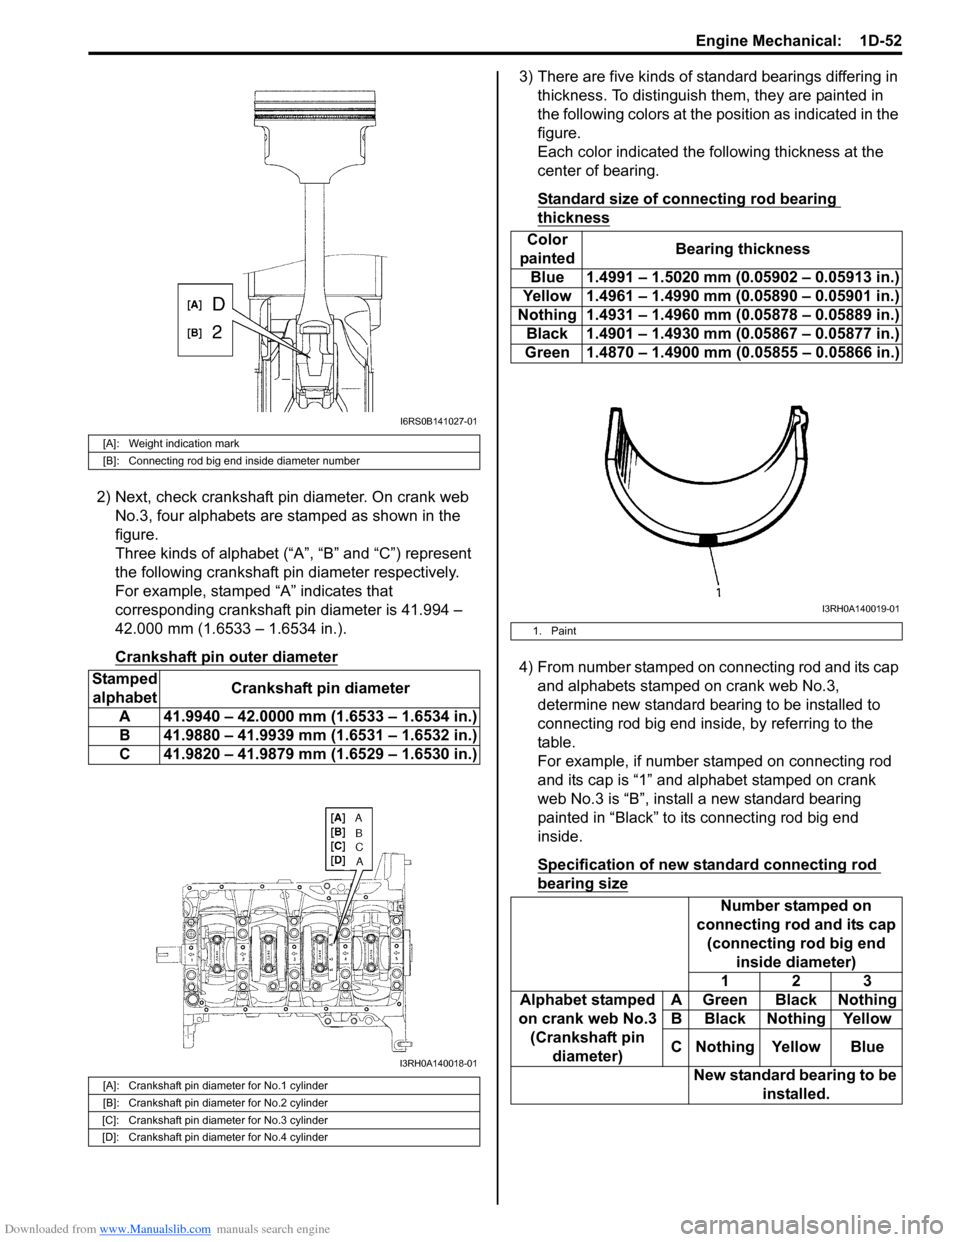 SUZUKI SWIFT 2005 2.G Service Service Manual Downloaded from www.Manualslib.com manuals search engine Engine Mechanical:  1D-52
2) Next, check crankshaft pin diameter. On crank web No.3, four alphabets are stamped as shown in the 
figure.
Three 